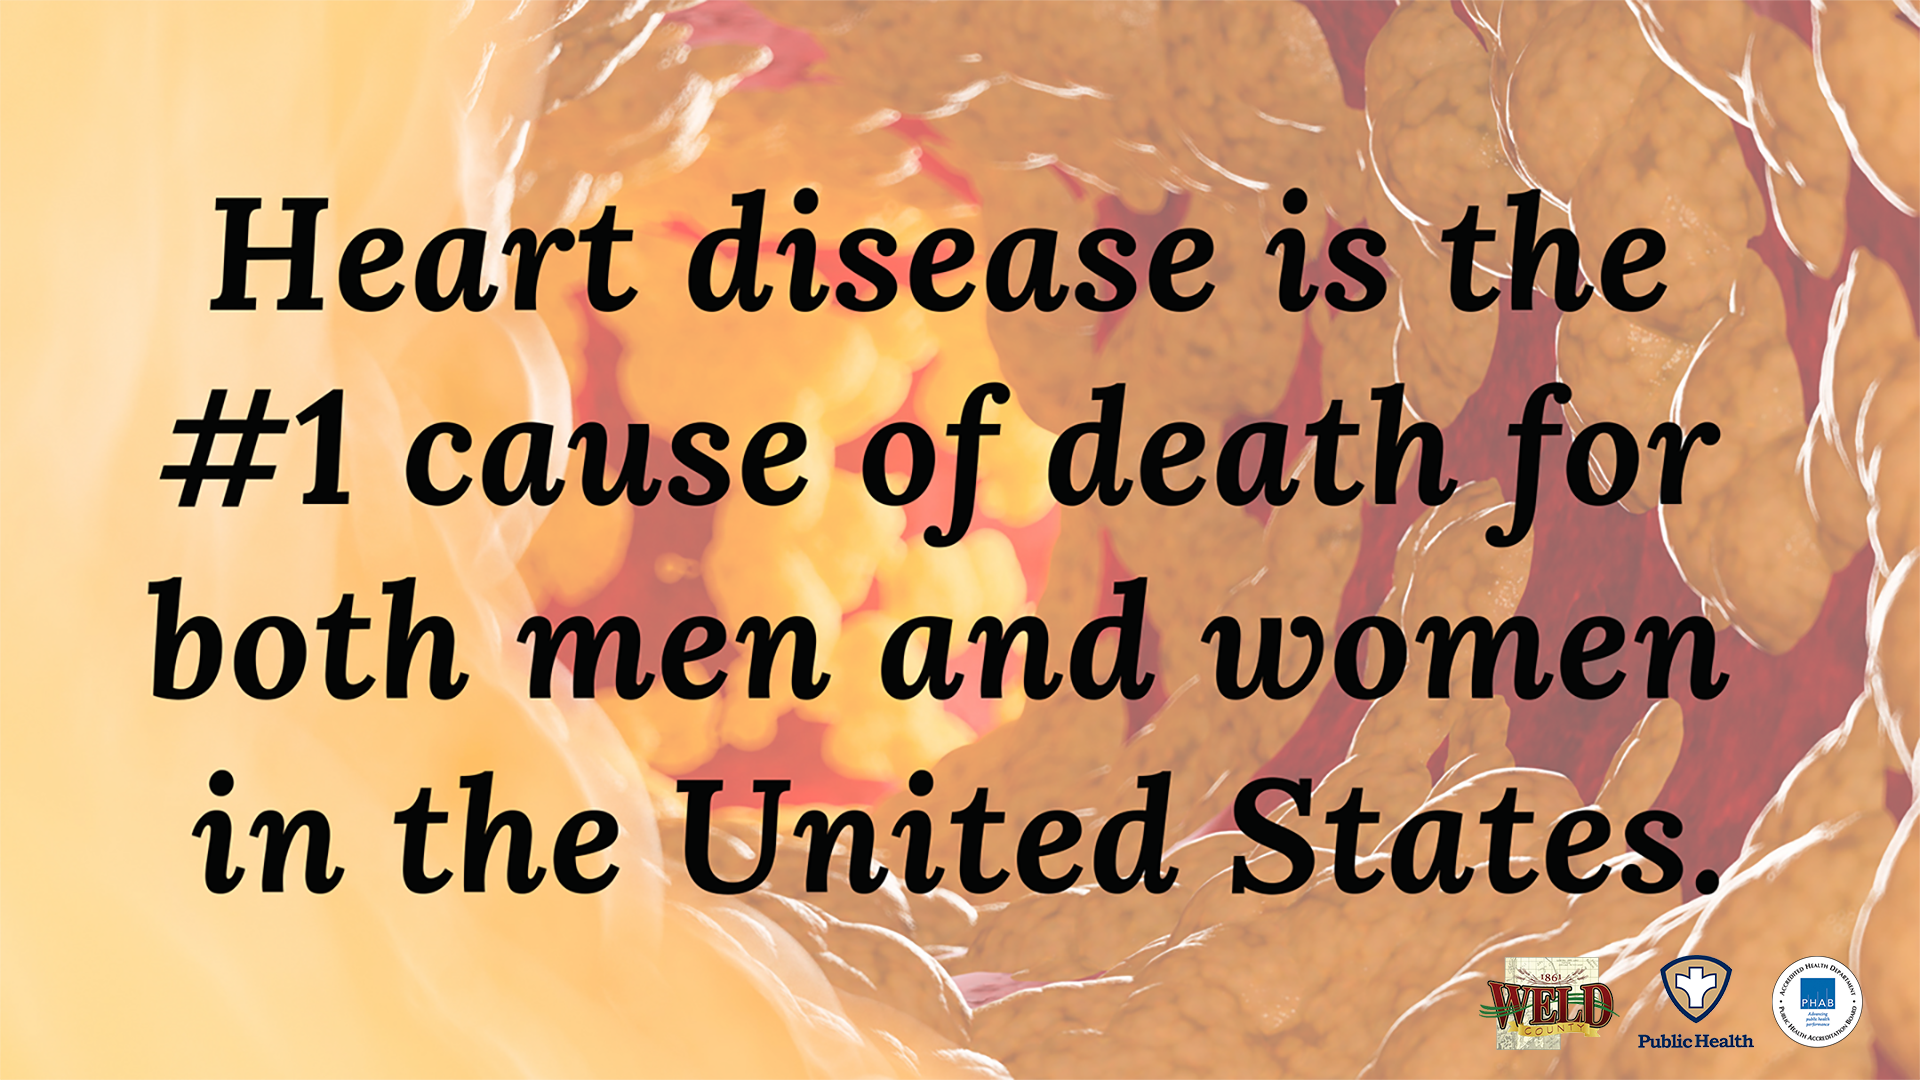 Heart disease is the number one cause of death for both men and women in the United States